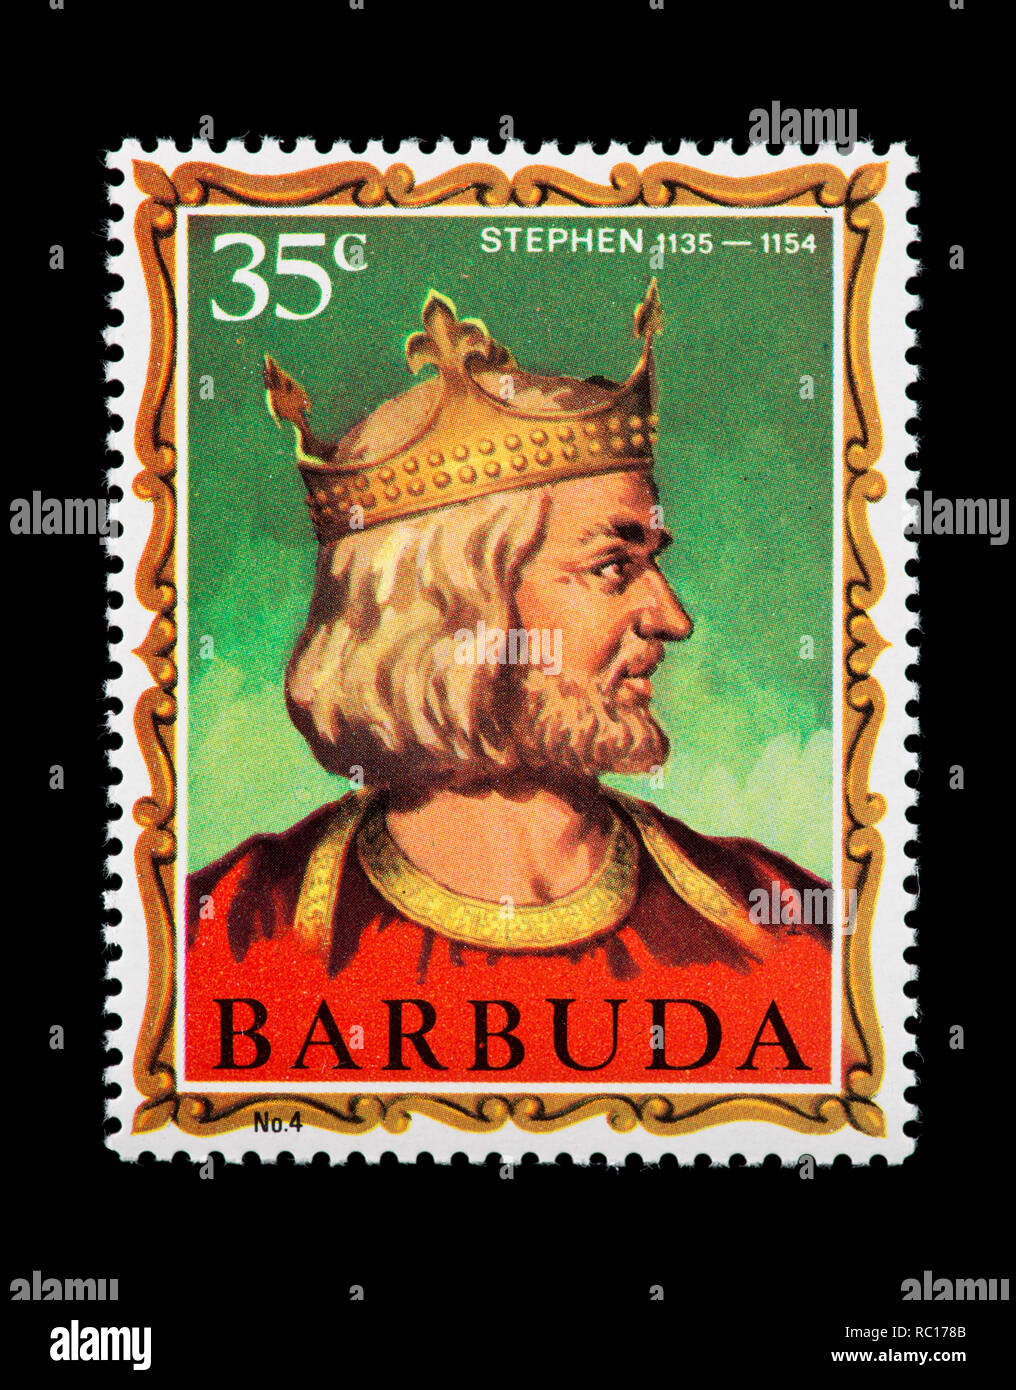 Postage stamp from Barbuda depicting Stephen, former king of England Stock Photo